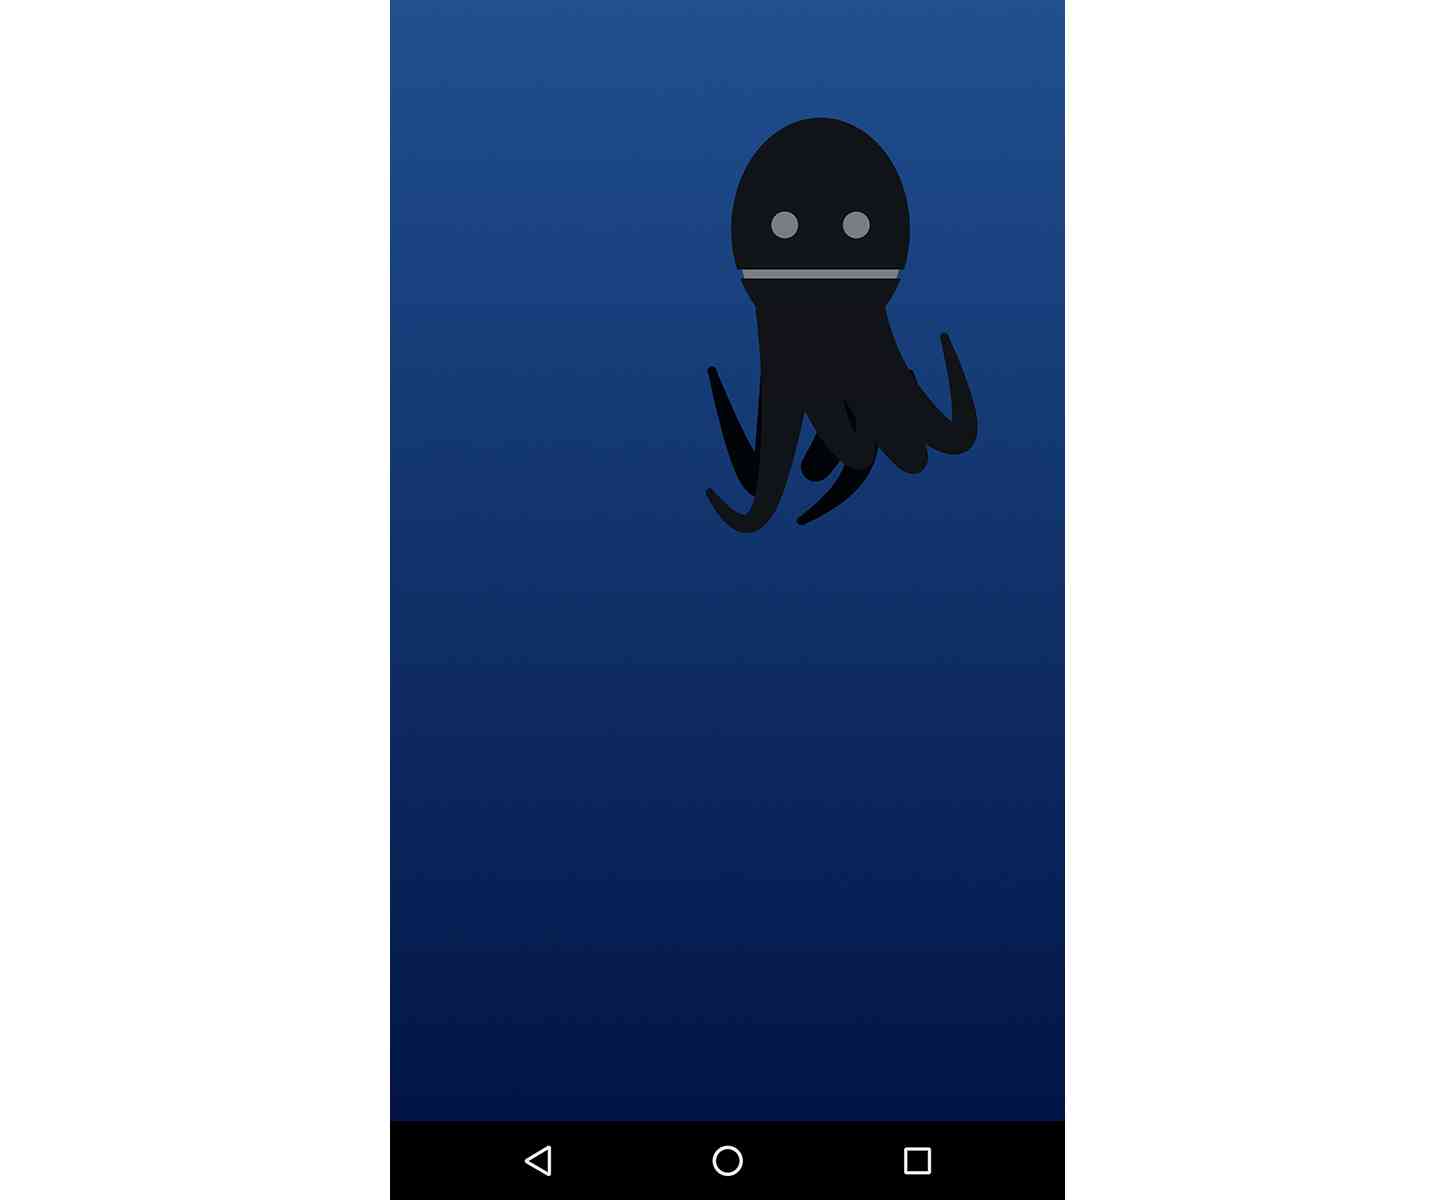 Android O Developer Preview 4 octopus Easter egg